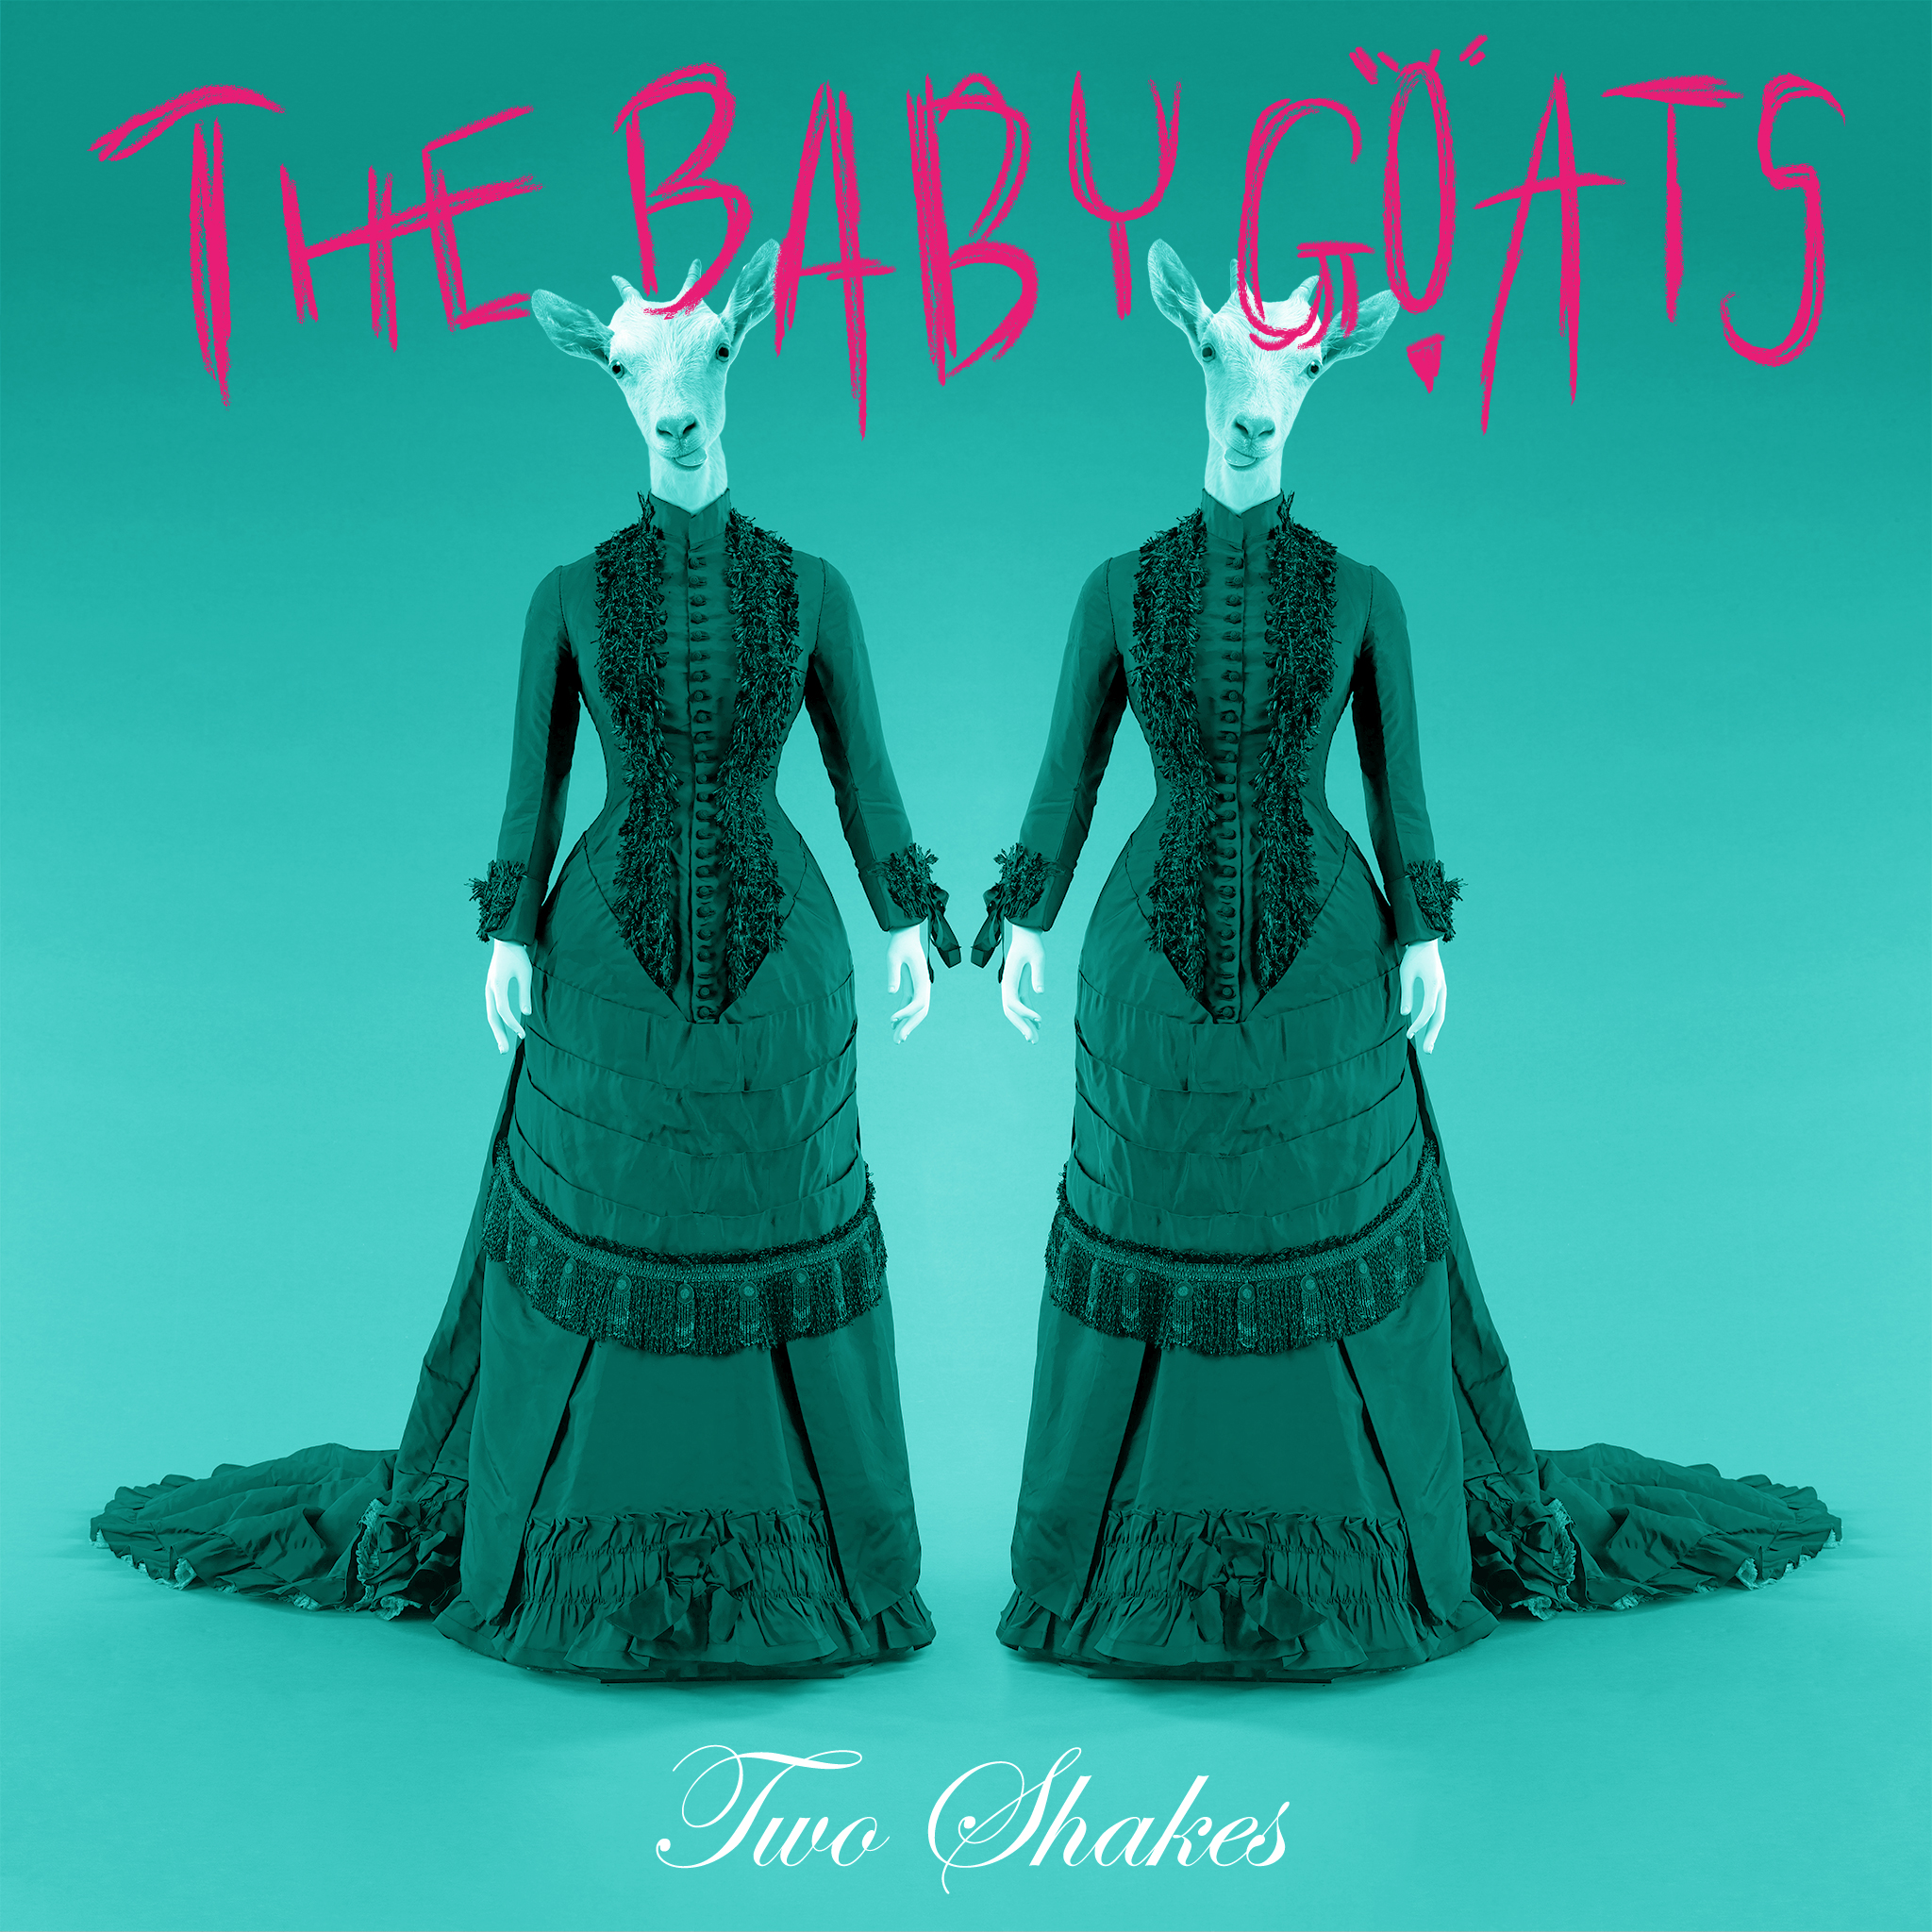 The Baby Goats - Two Shakes Single Art